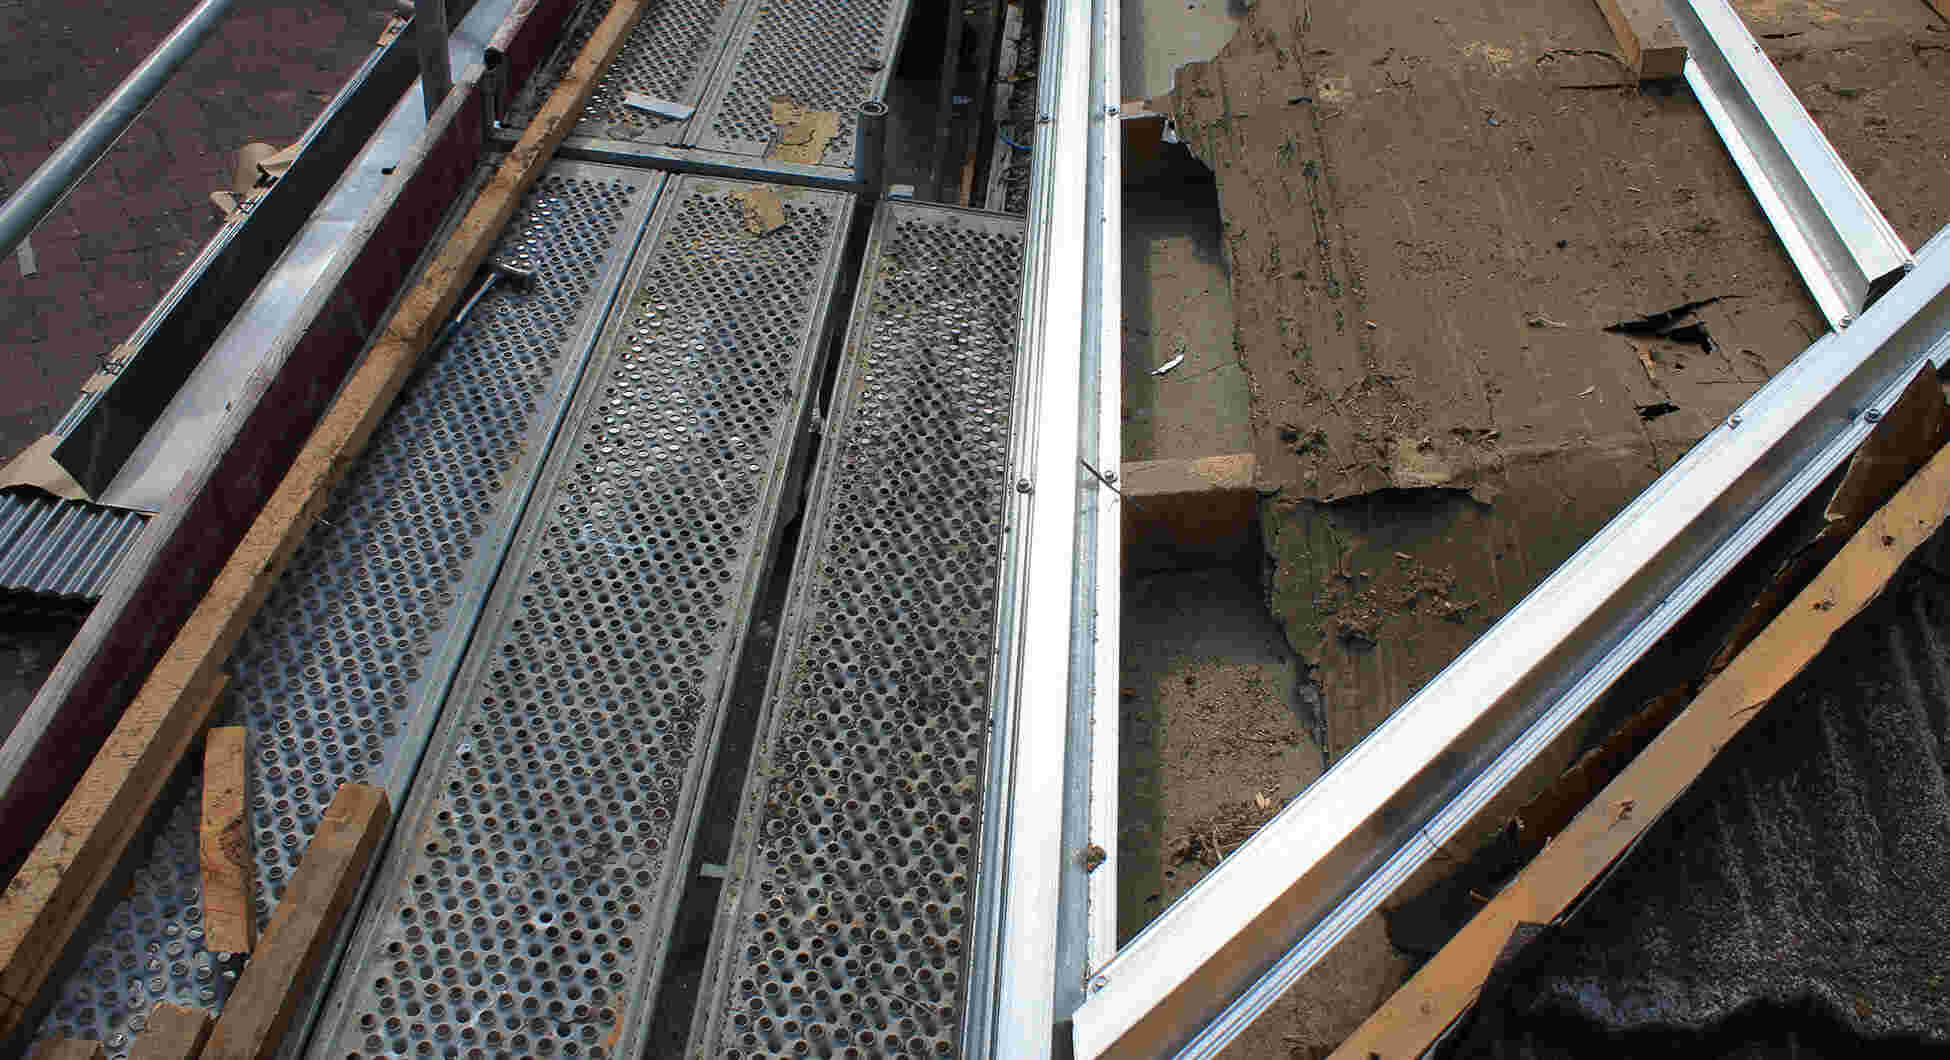 Residential Roof Purlins